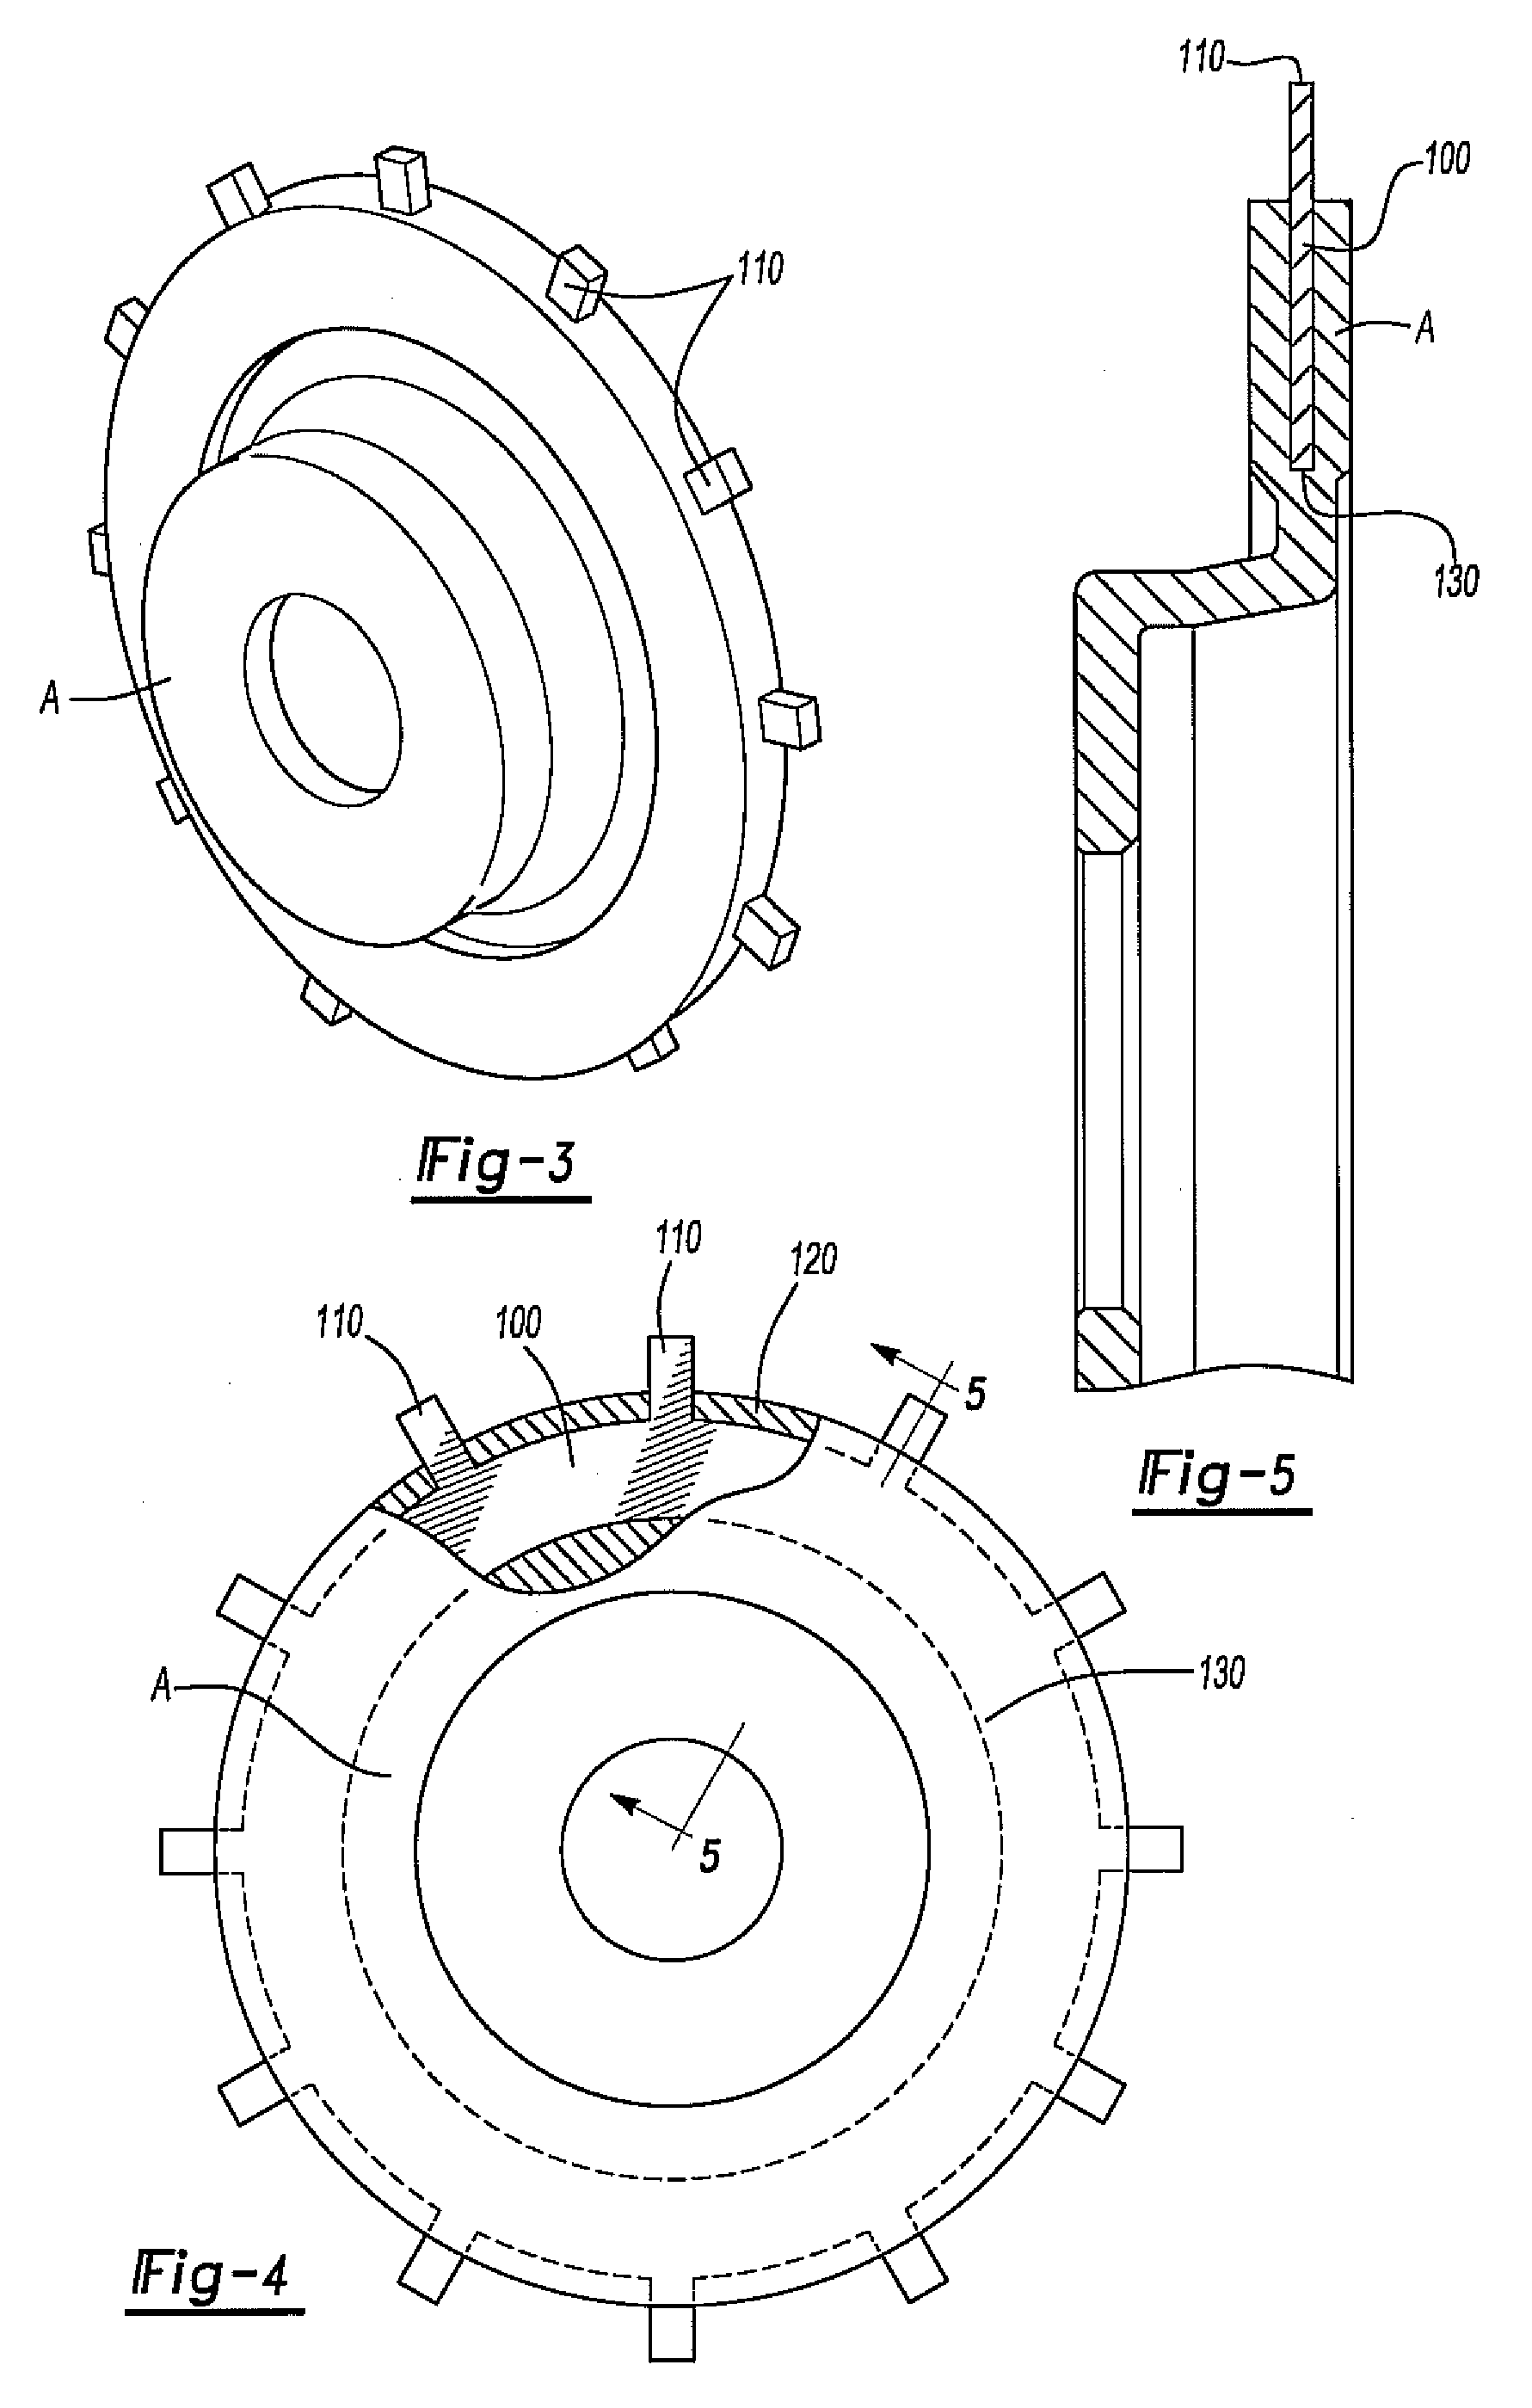 Insert for manufacture of an enhanced sound dampening composite rotor casting and method thereof